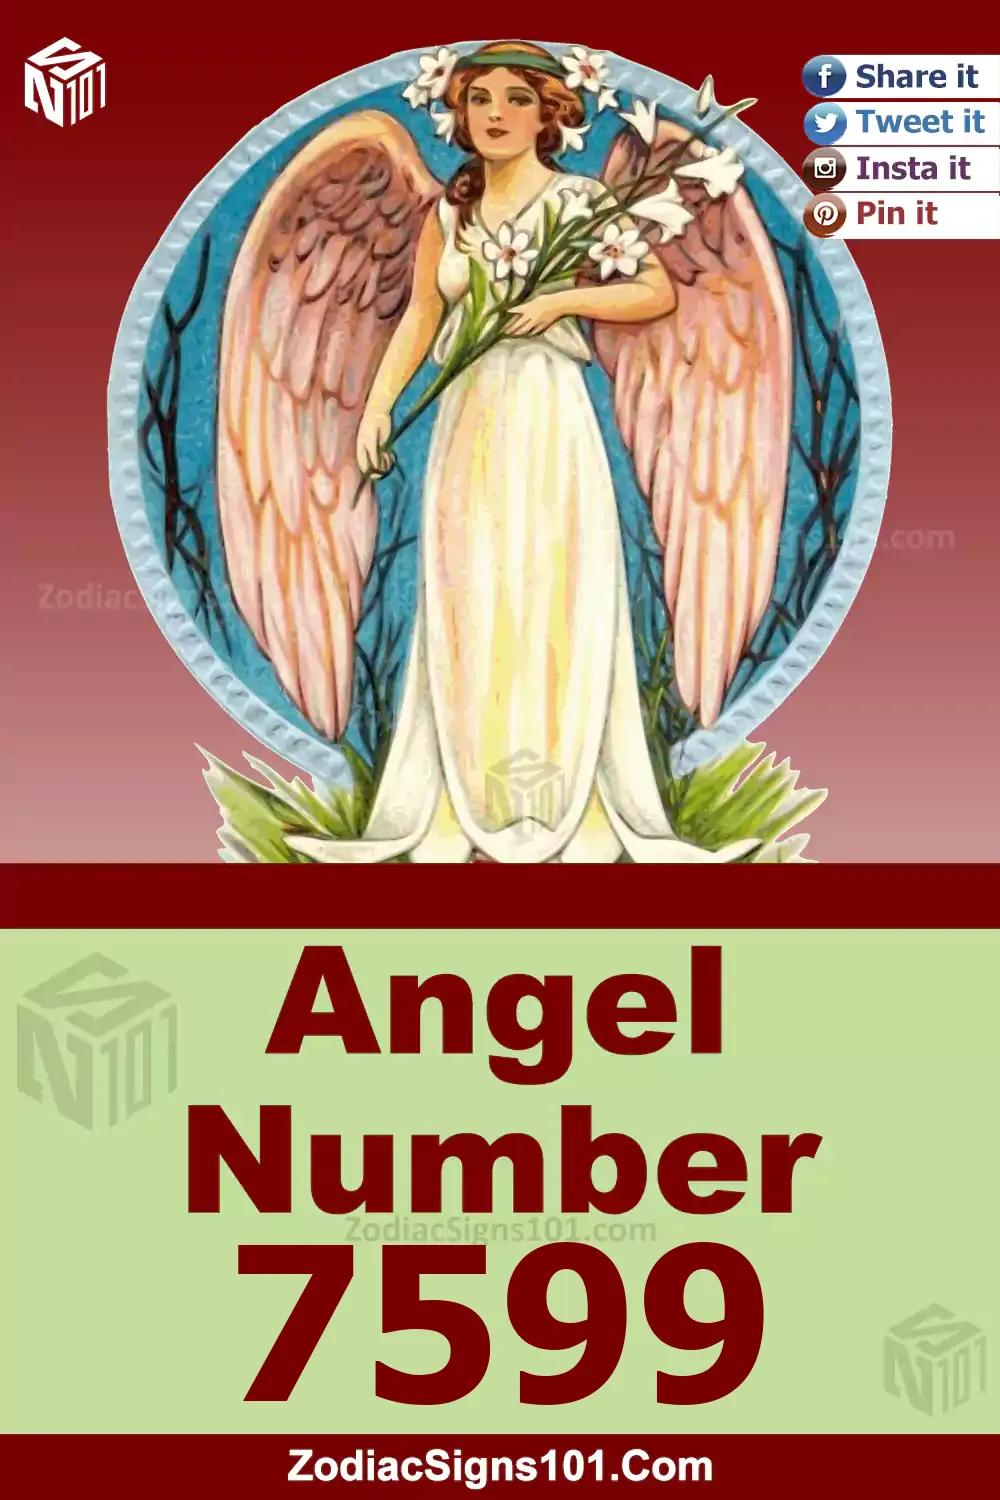 7599 Angel Number Meaning